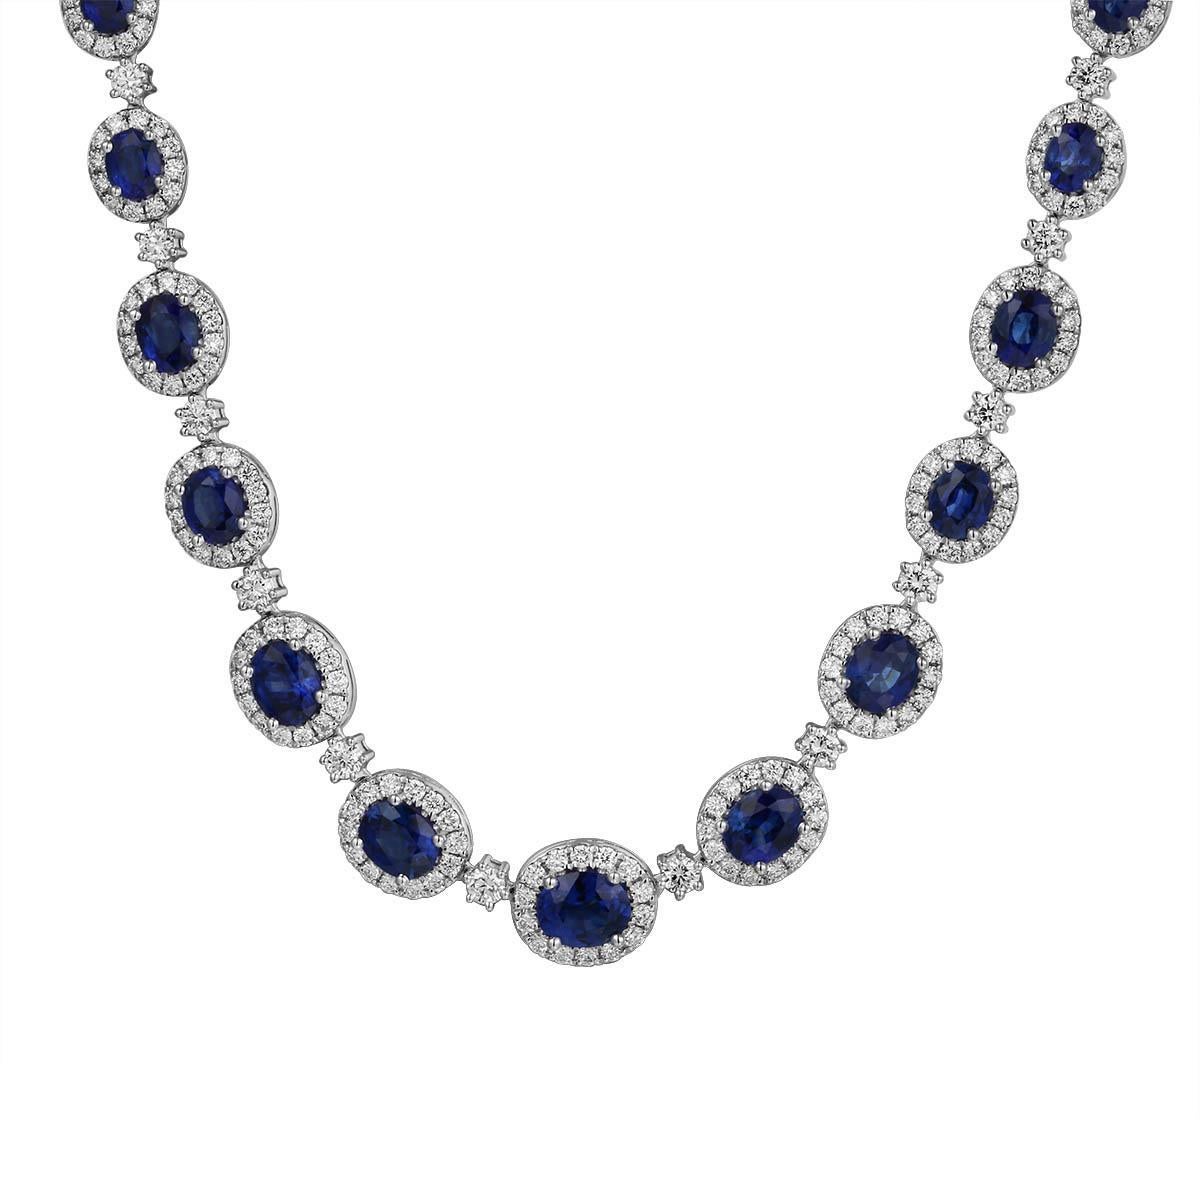 Add a majestic touch to your ensemble with this stunning 10.14carat royal blue sapphire diamond statement necklace! This eye-catching necklace will turn heads with its dazzling popping color and exquisite craftsmanship that will make any outfit